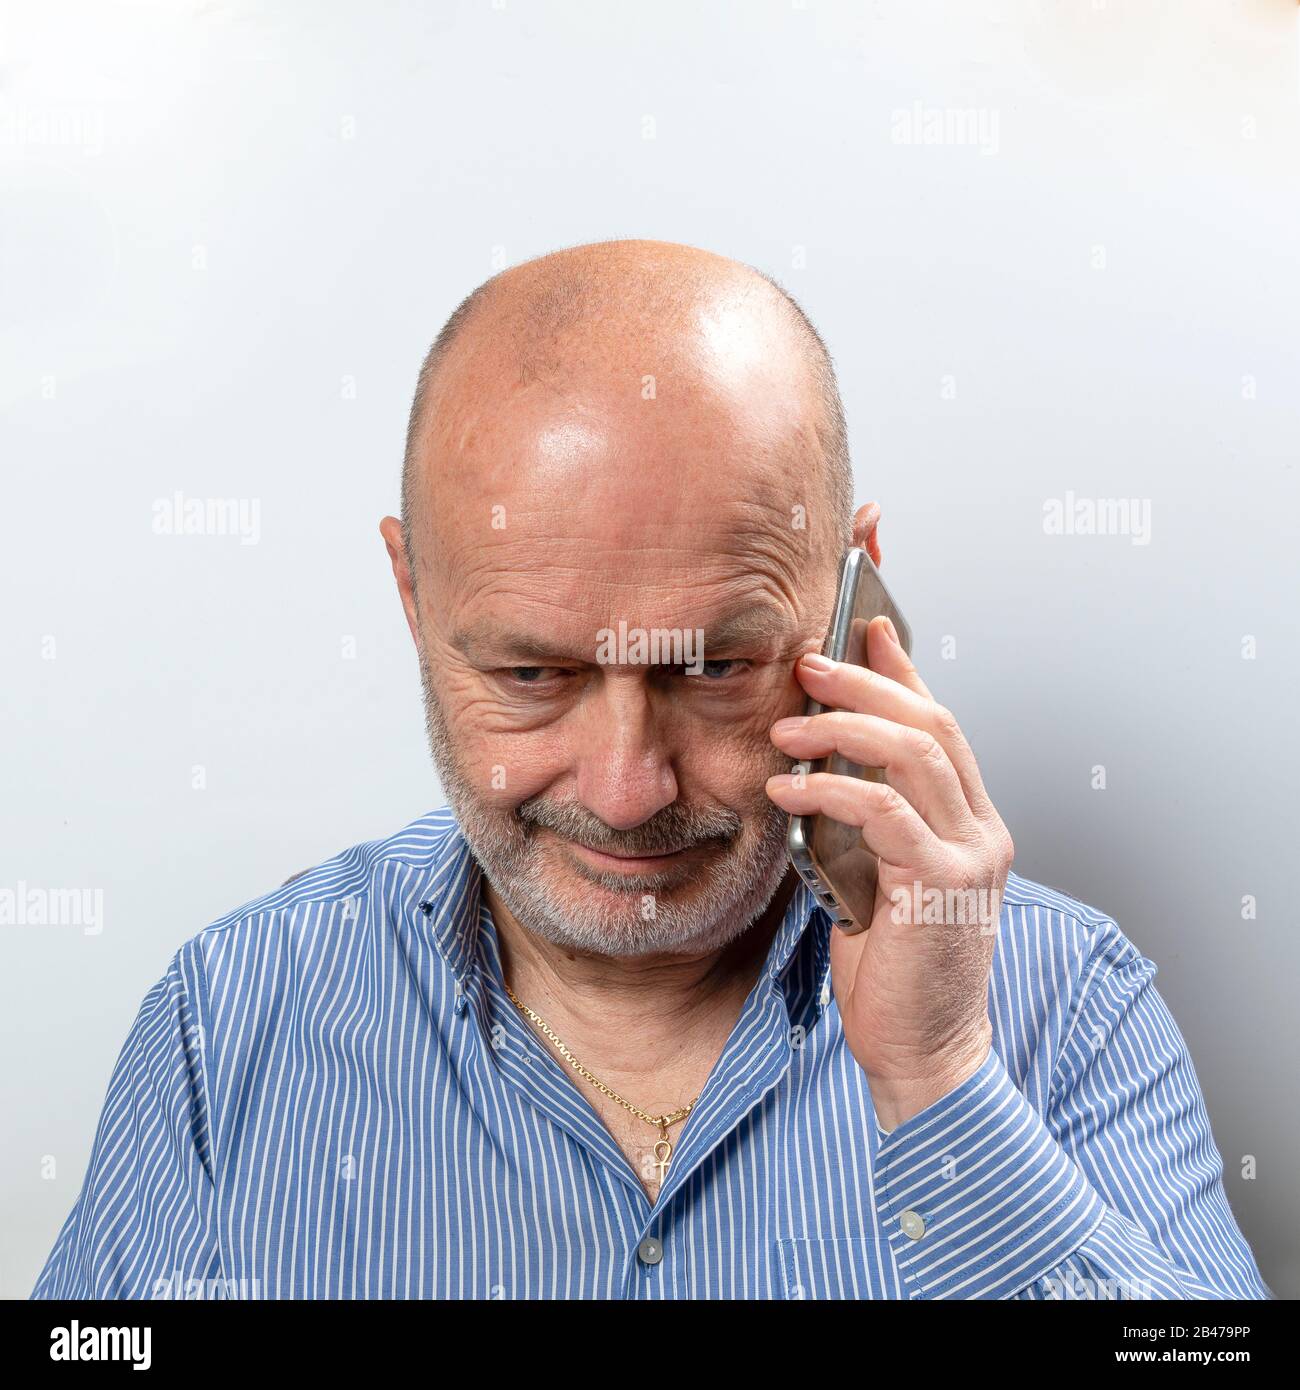 A middle-aged man during a cell phone conversation Stock Photo